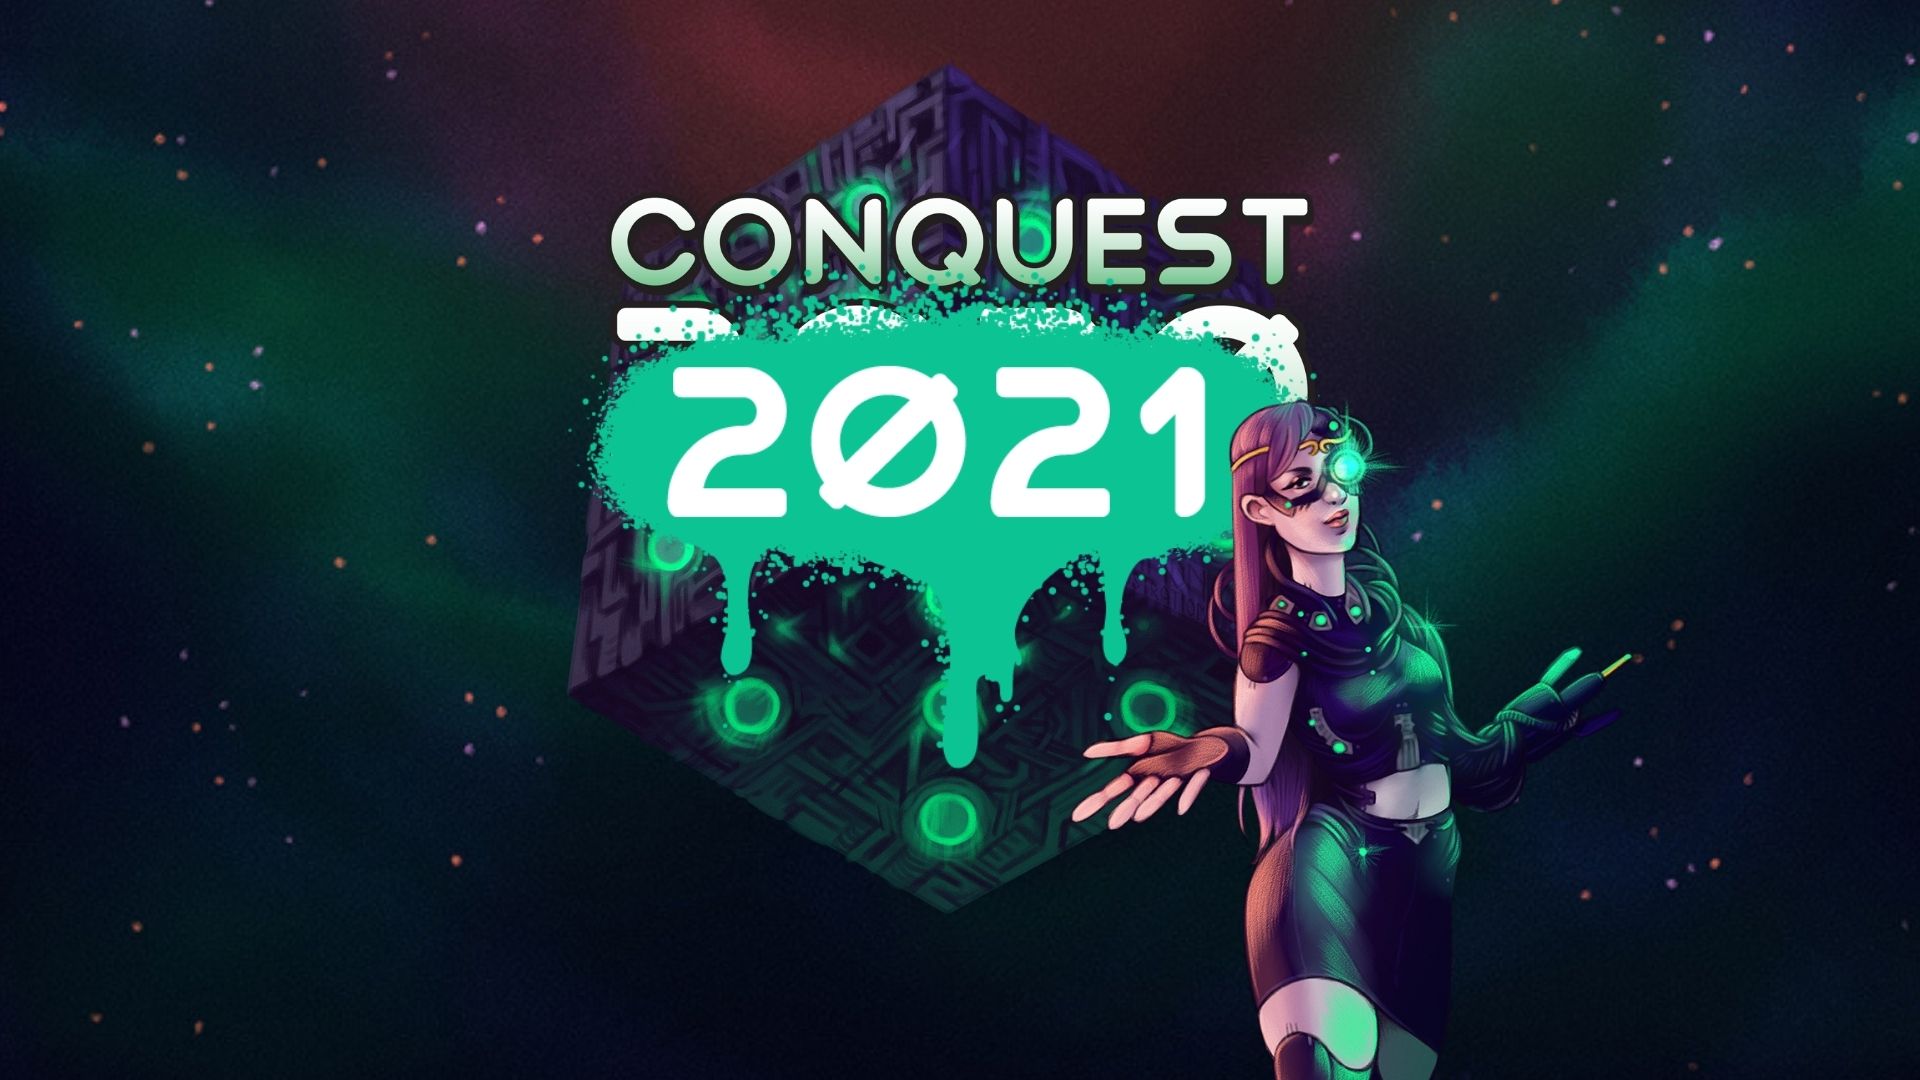 Conquest 2021 is over! ..and plans for Conquest 2022?